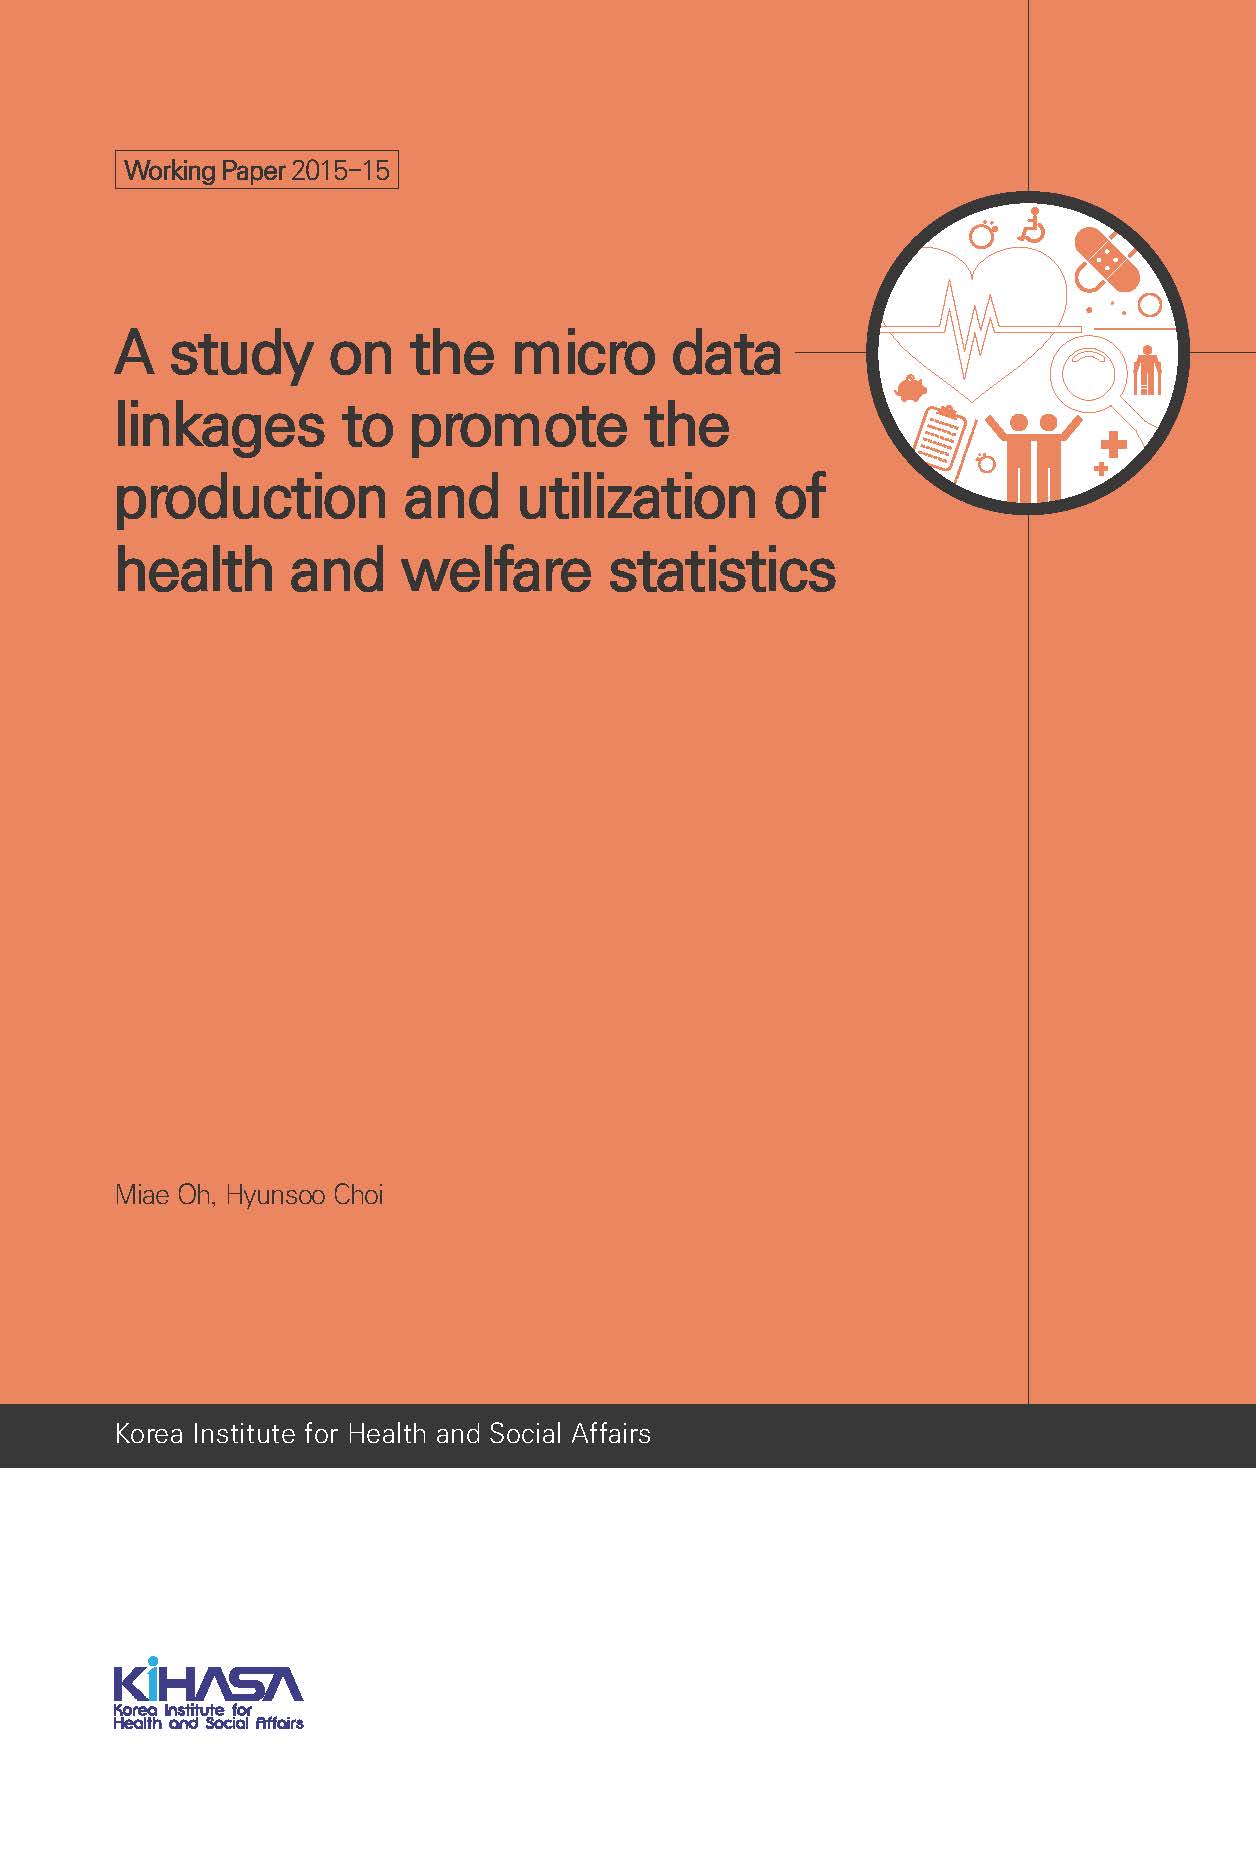 A study on the micro data linkages to promote the production and utilization of health and welfare statistics